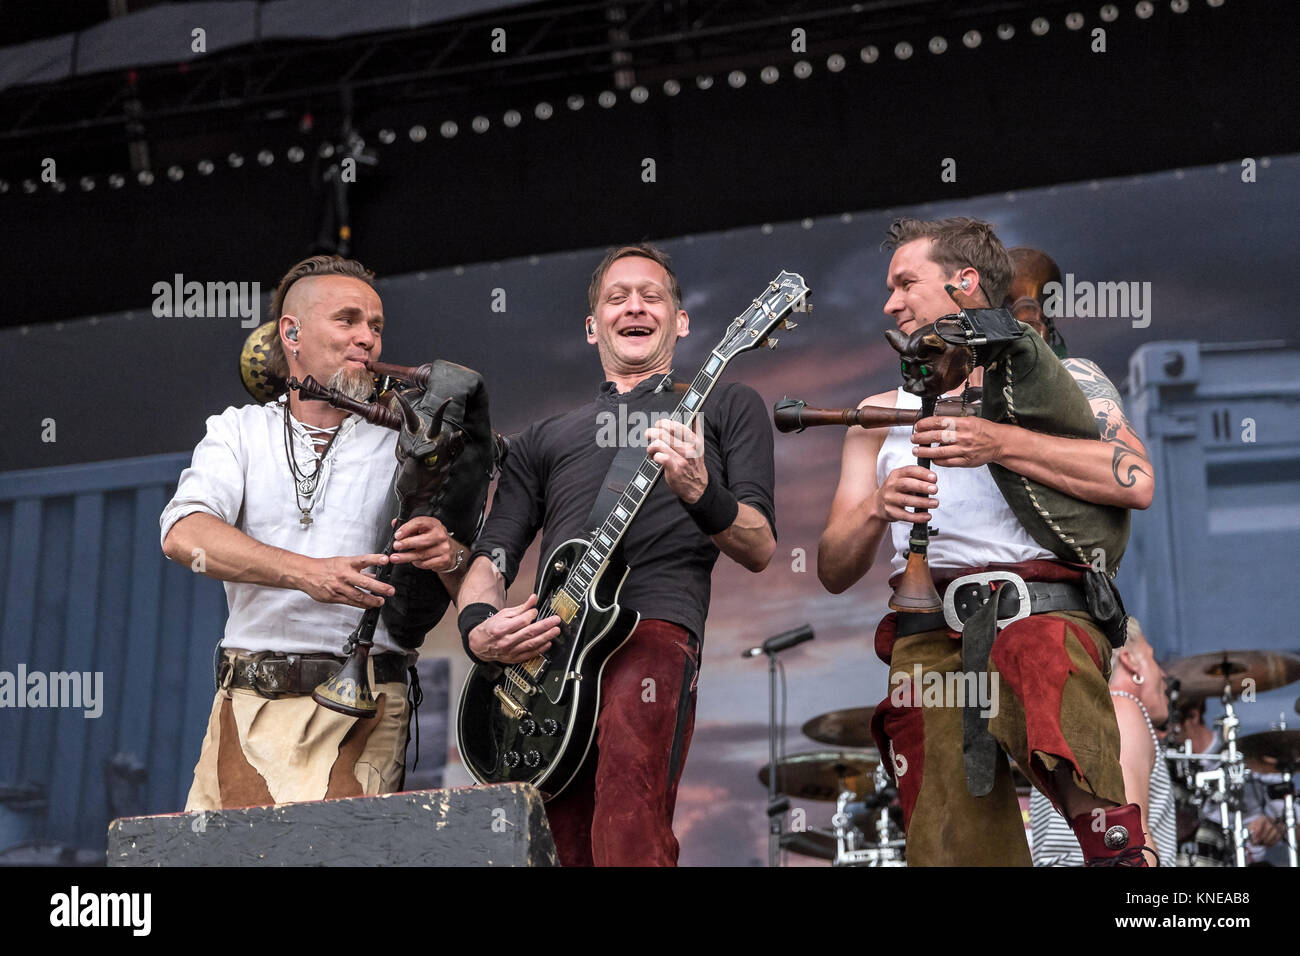 The German power metal band In Extremo performs a live concert at the Swiss music festival Greenfield Festival 2015 in Interlaken. Here musician Boris Pfeiffer (L) is seen live on stage with Marco Ernst-Felix Zorzytzky (R) and guitarist Sebastian Oliver Lange. Switzerland, 12/06 2015. Stock Photo